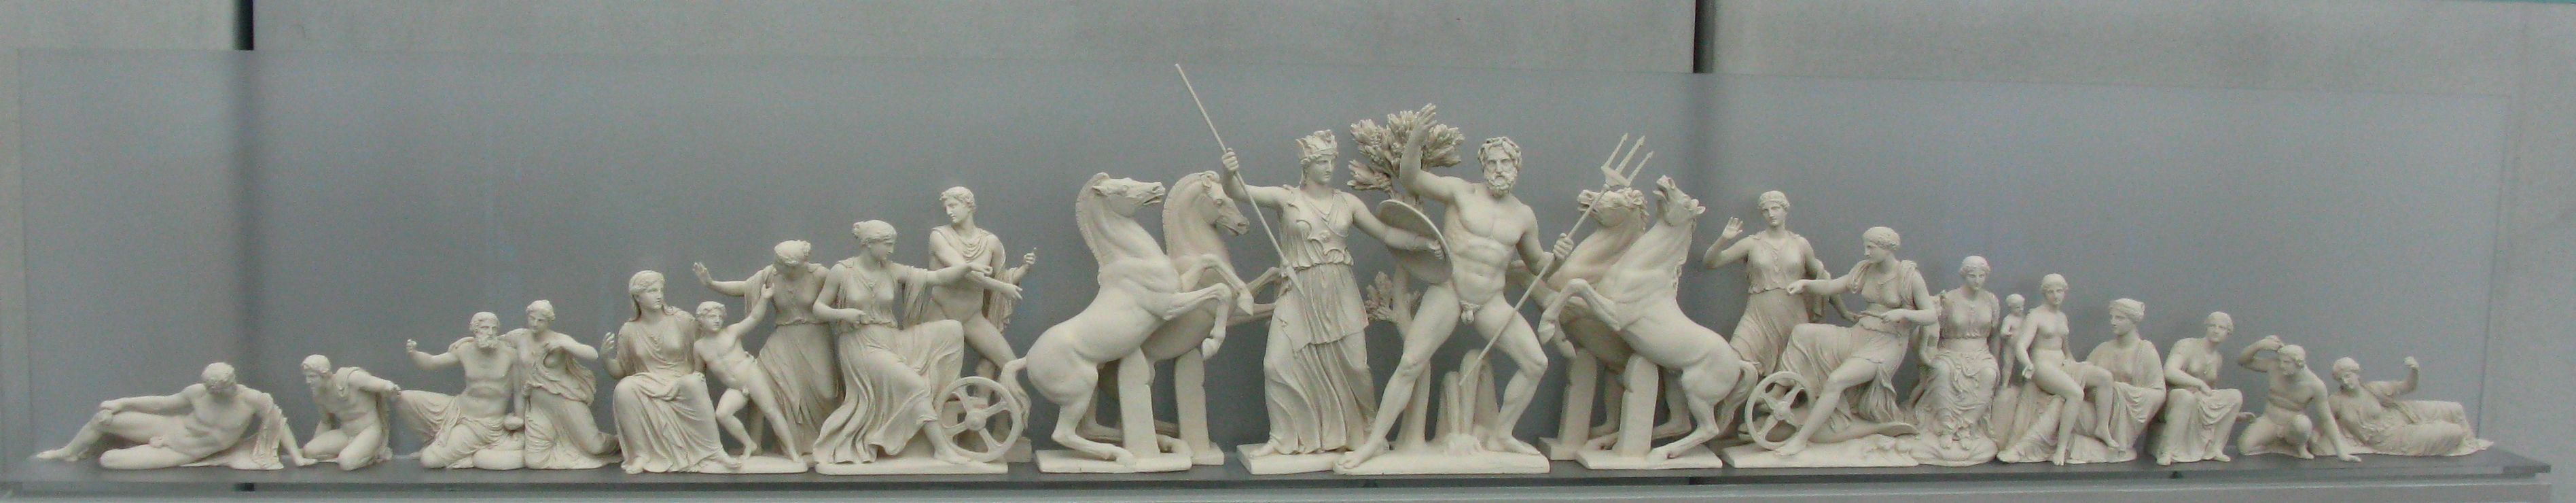 Reconstruction_of_the_west_pediment_of_the_Parthenon_1